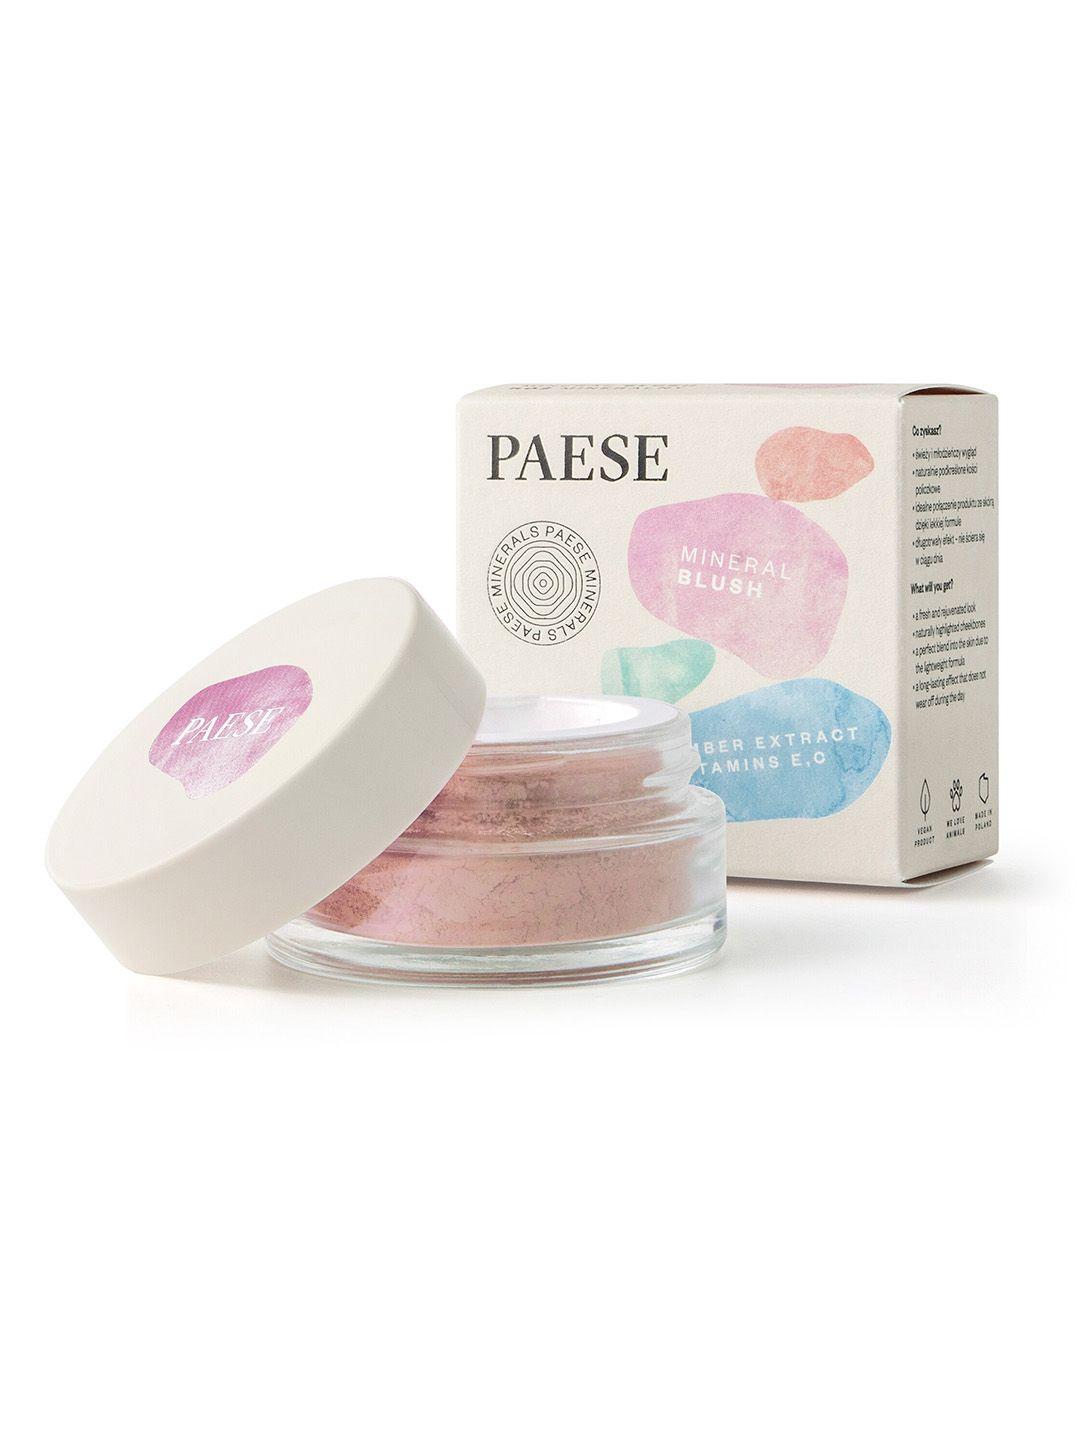 paese cosmetics mineral blush with amber extract & vitamin e and c 6g - mallow 302c